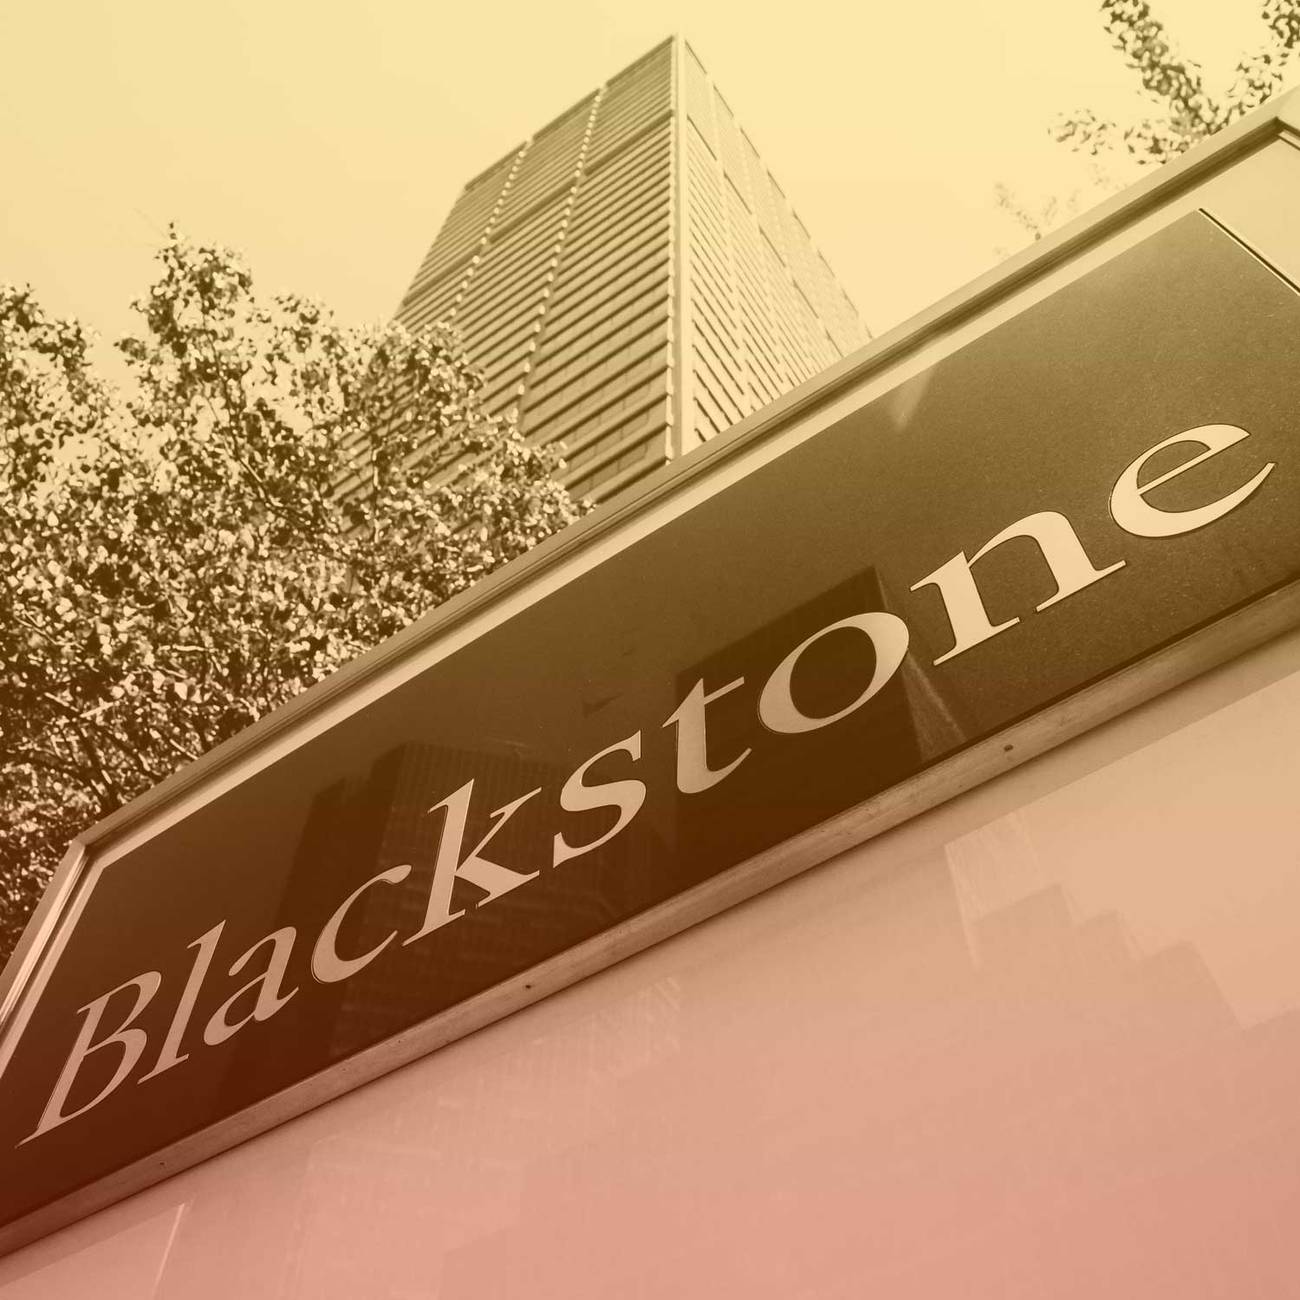 Why Did Investment Firm Blackstone Buy Ancestry?